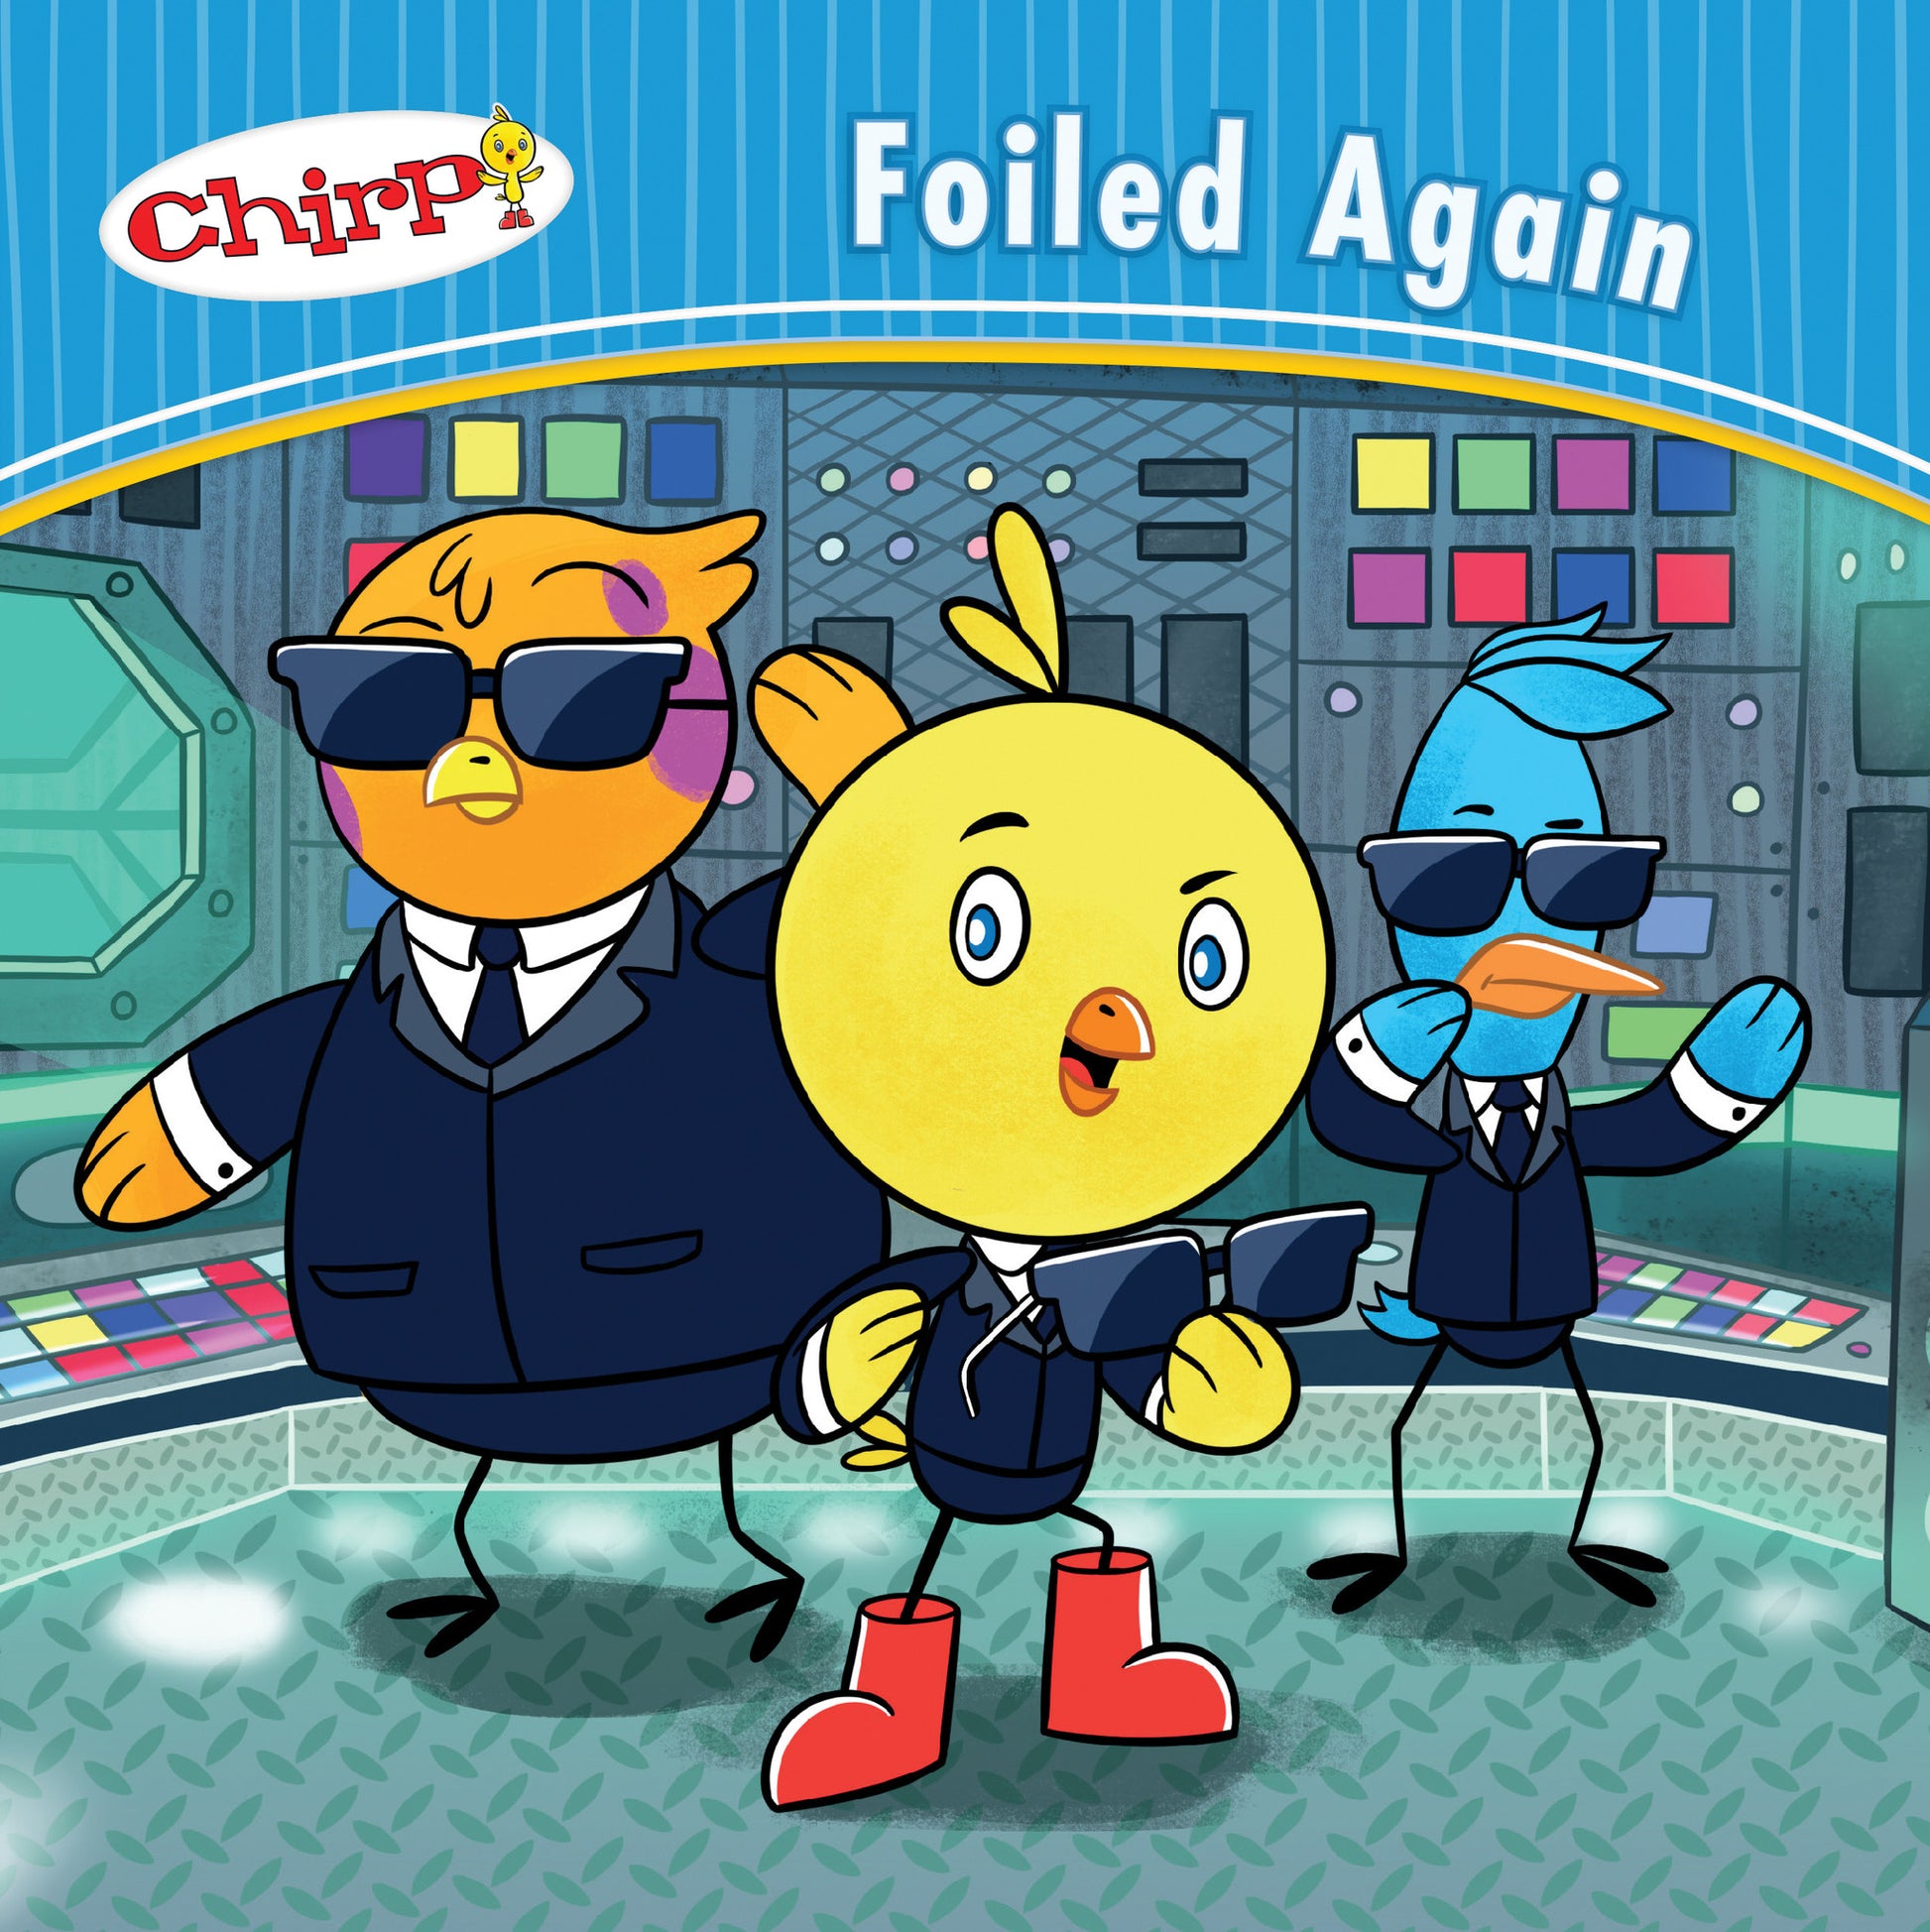 Chirp: Foiled Again - Owlkids - Reading for kids and literacy resources for parents made fun. Books helping kids to learn.